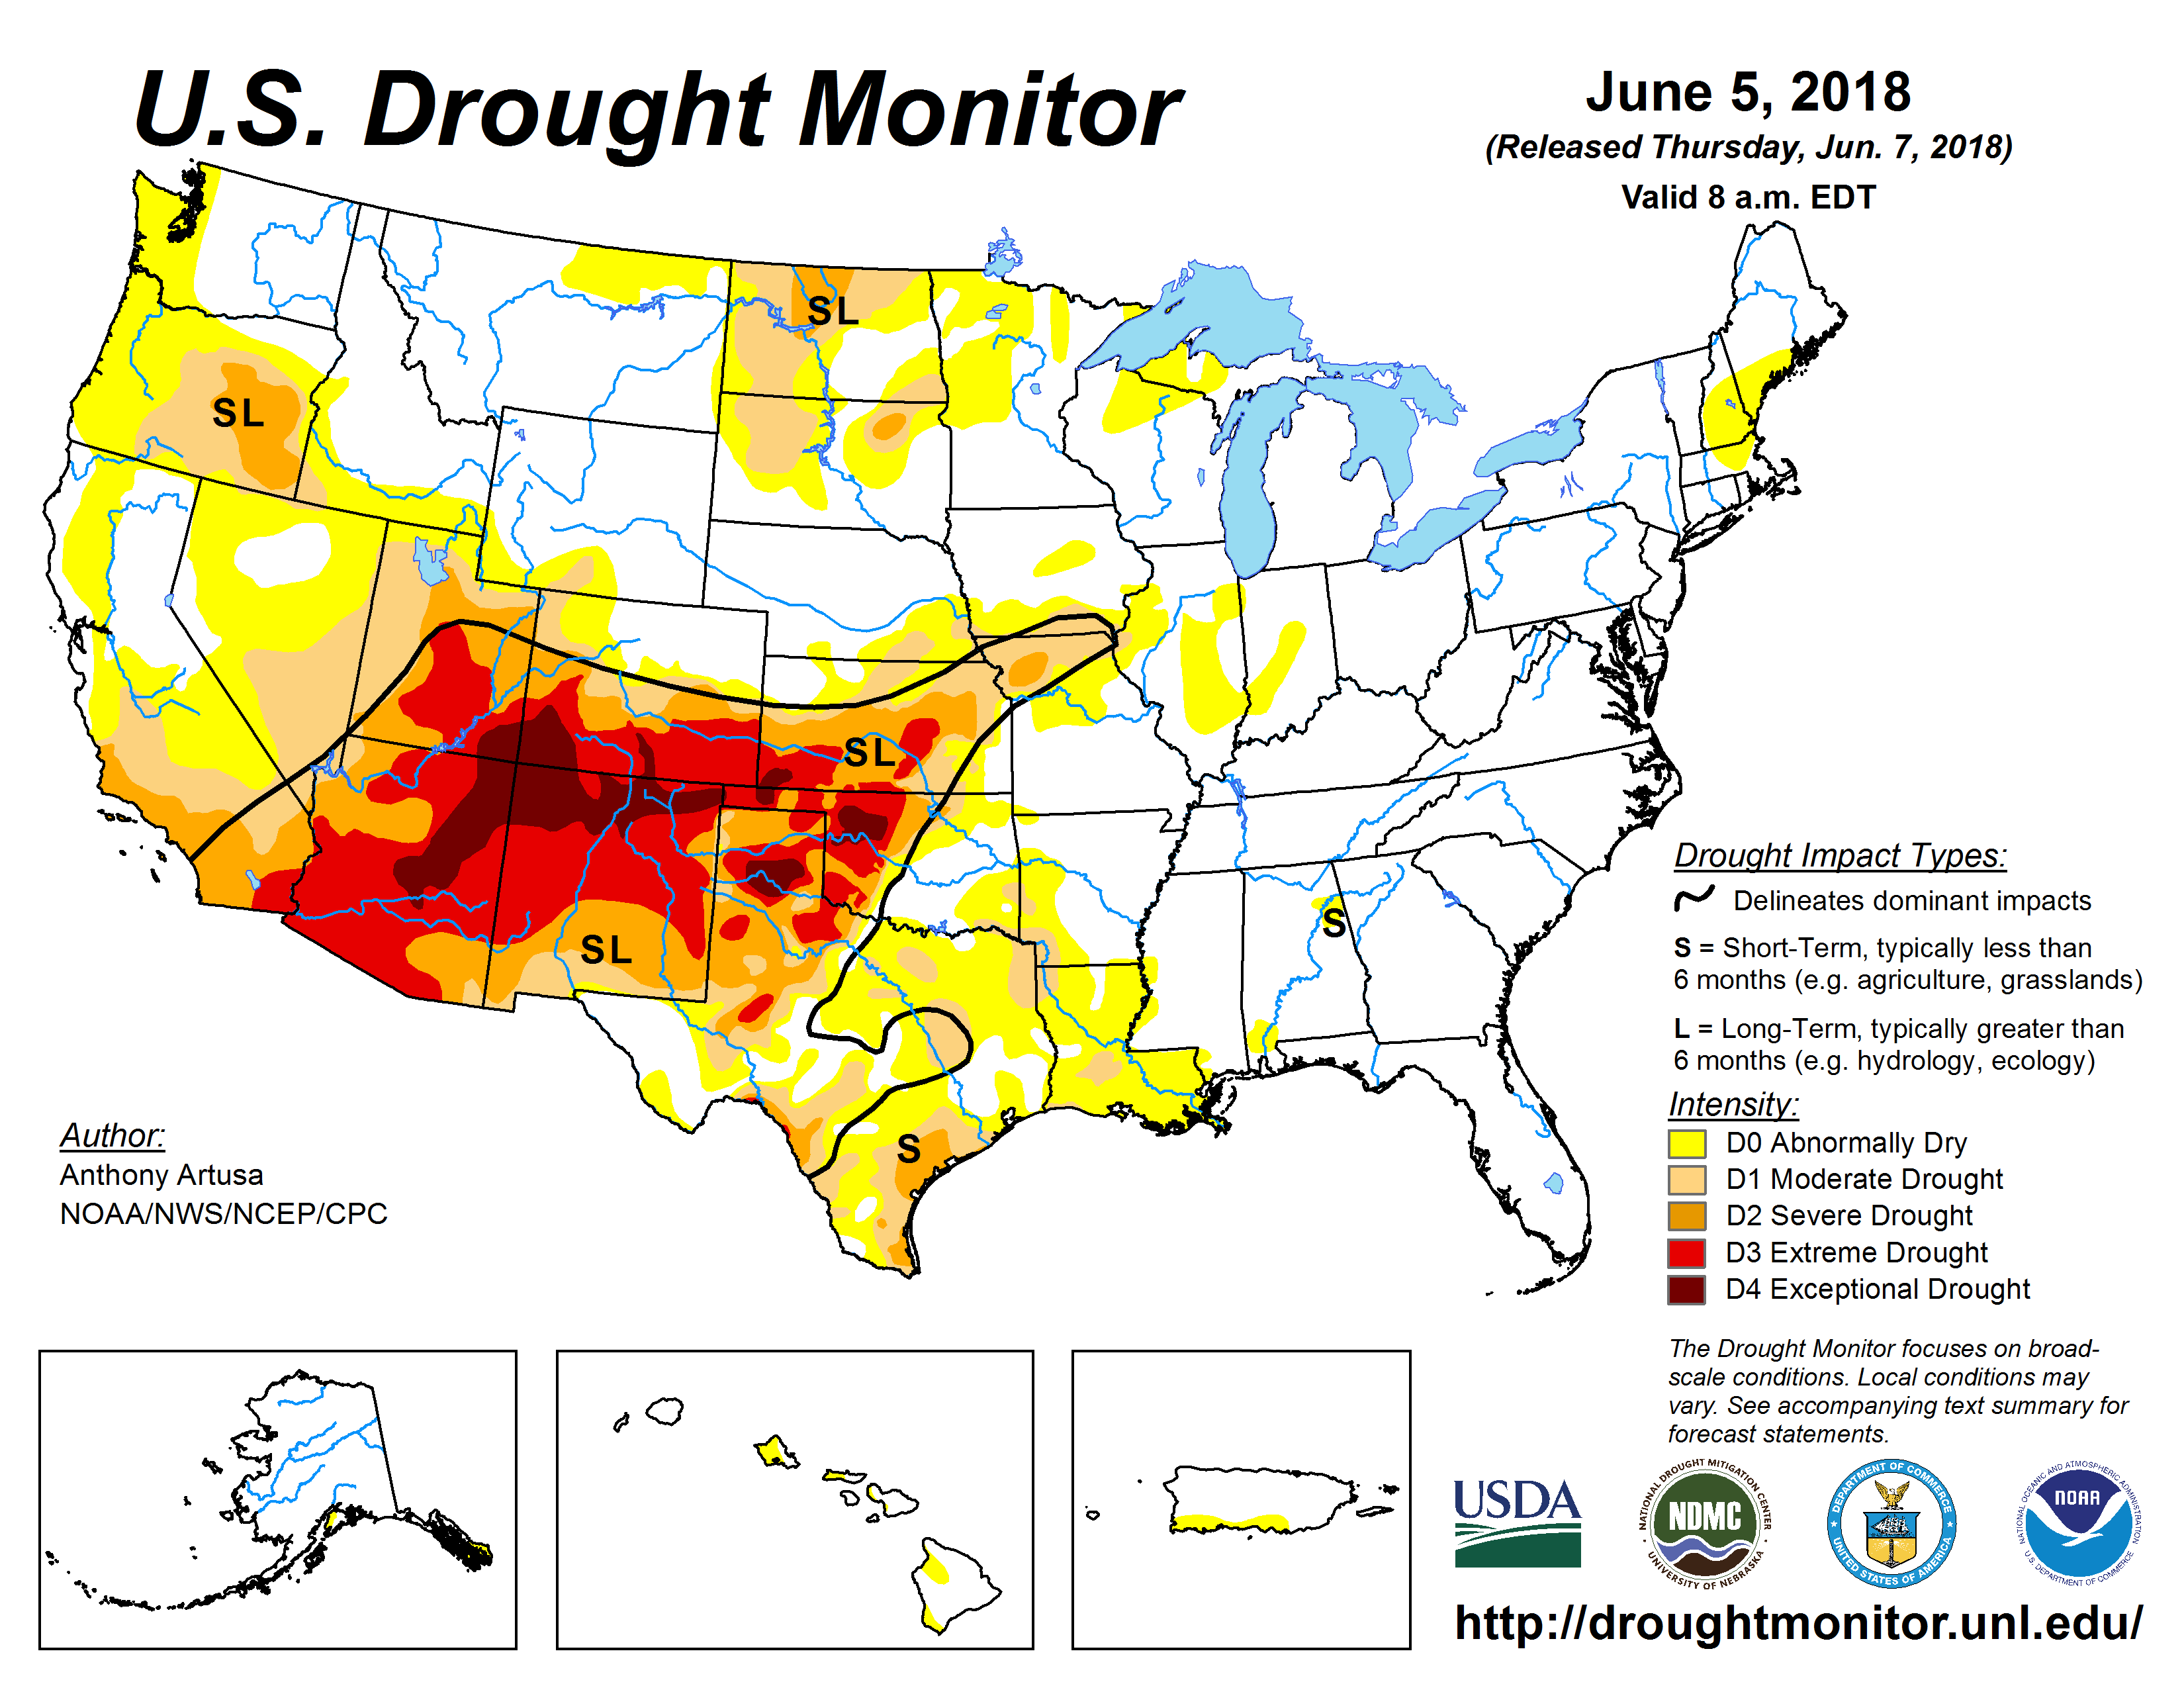 U.S. Drought Monitor Update for June 5, 2018 | National Centers for ...